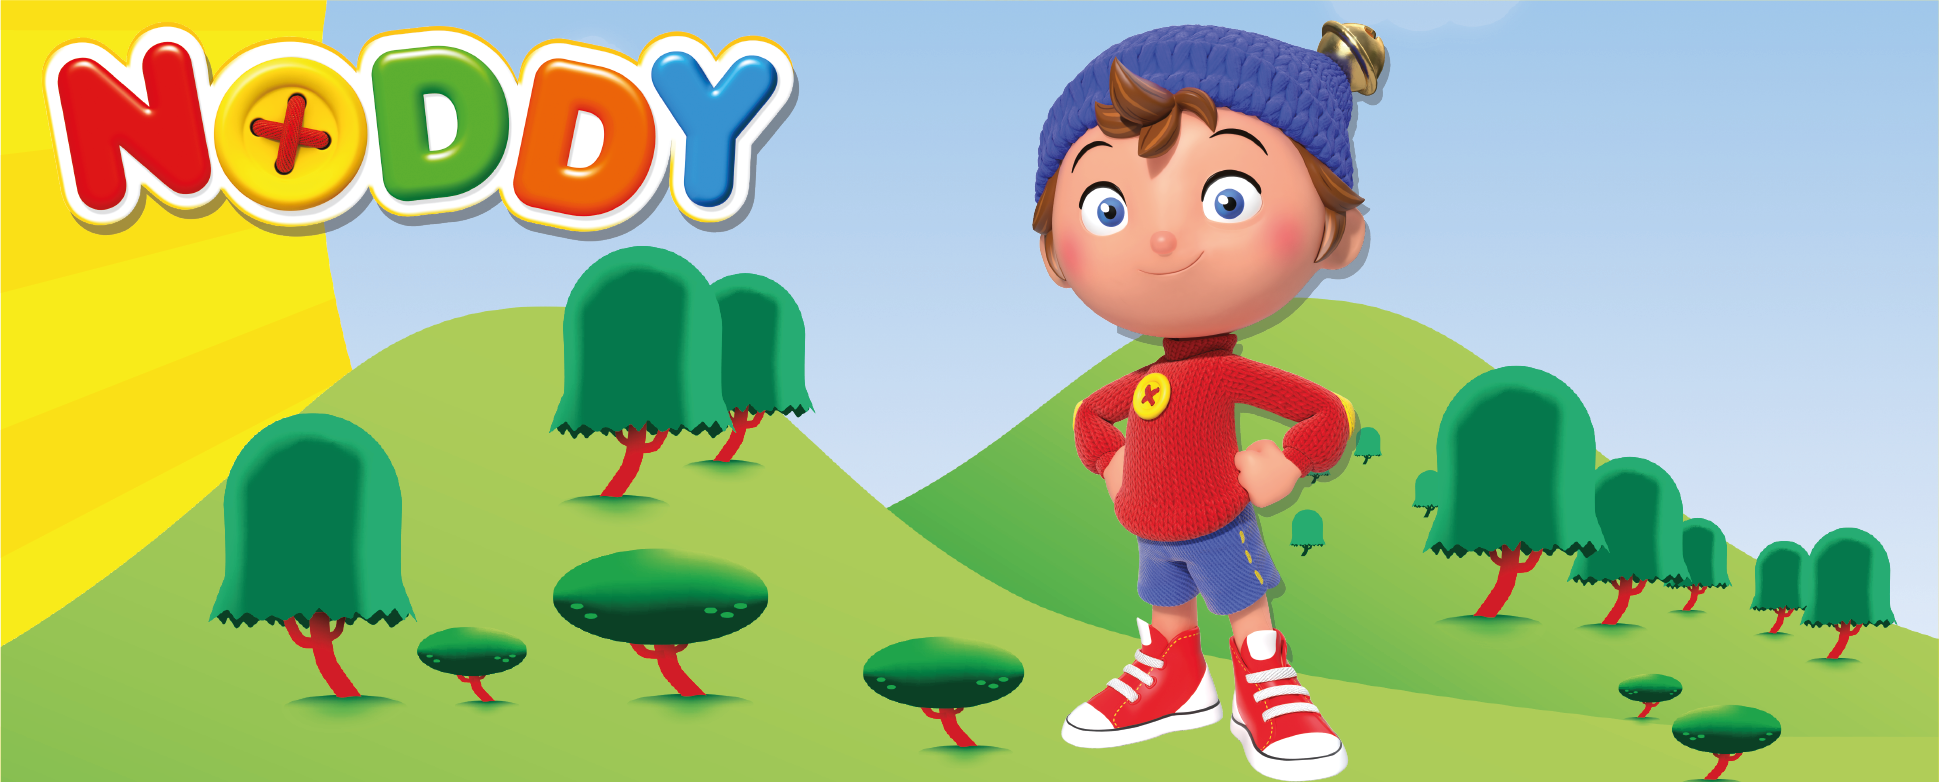 Nice Images Collection: Noddy Desktop Wallpapers